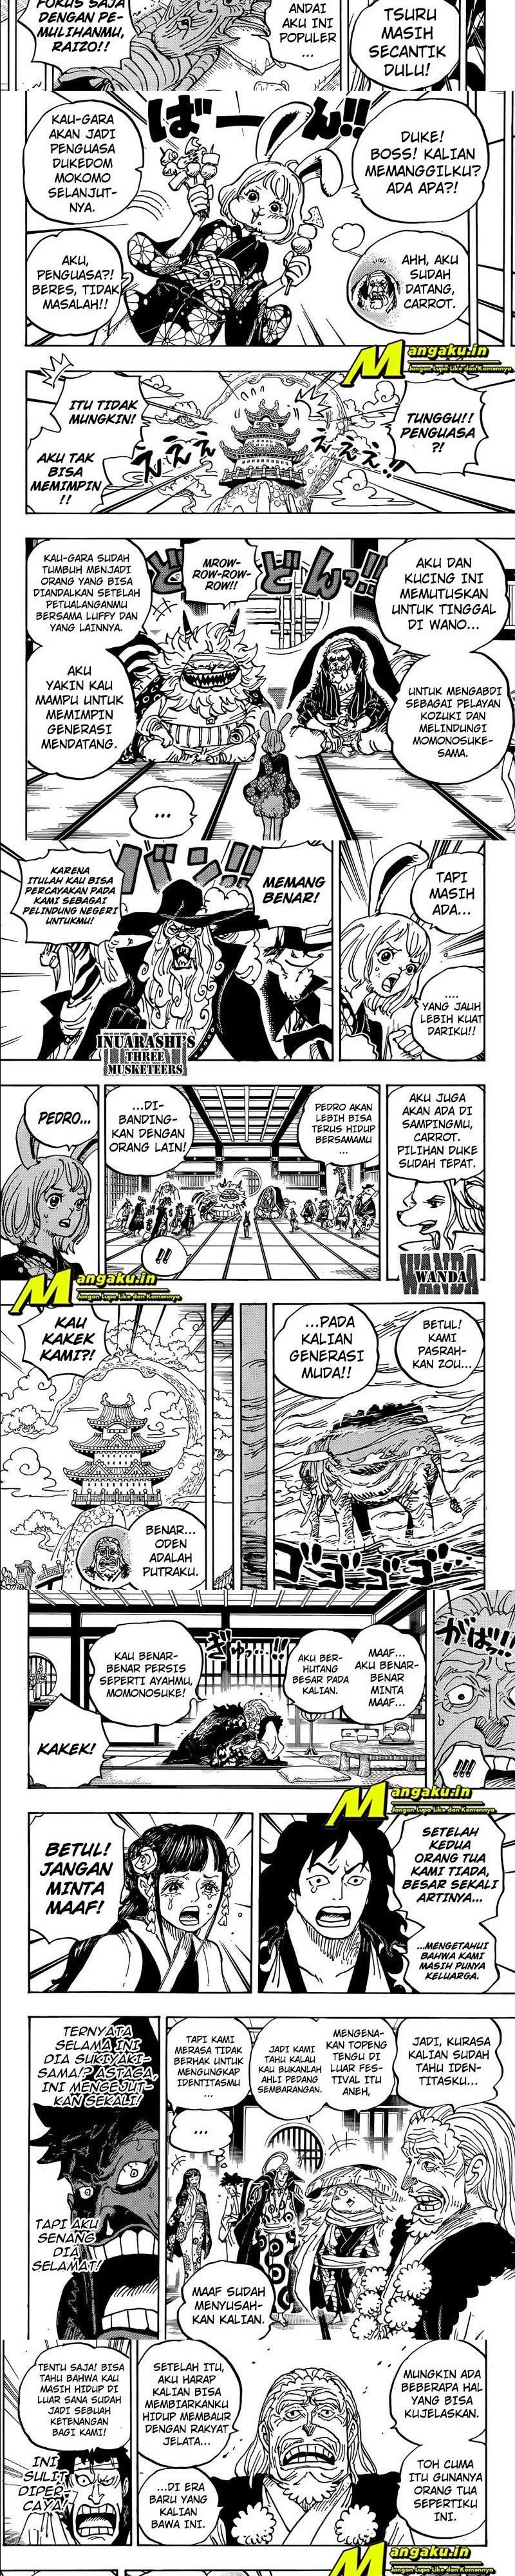 One Piece Chapter 1056 hq Image 1